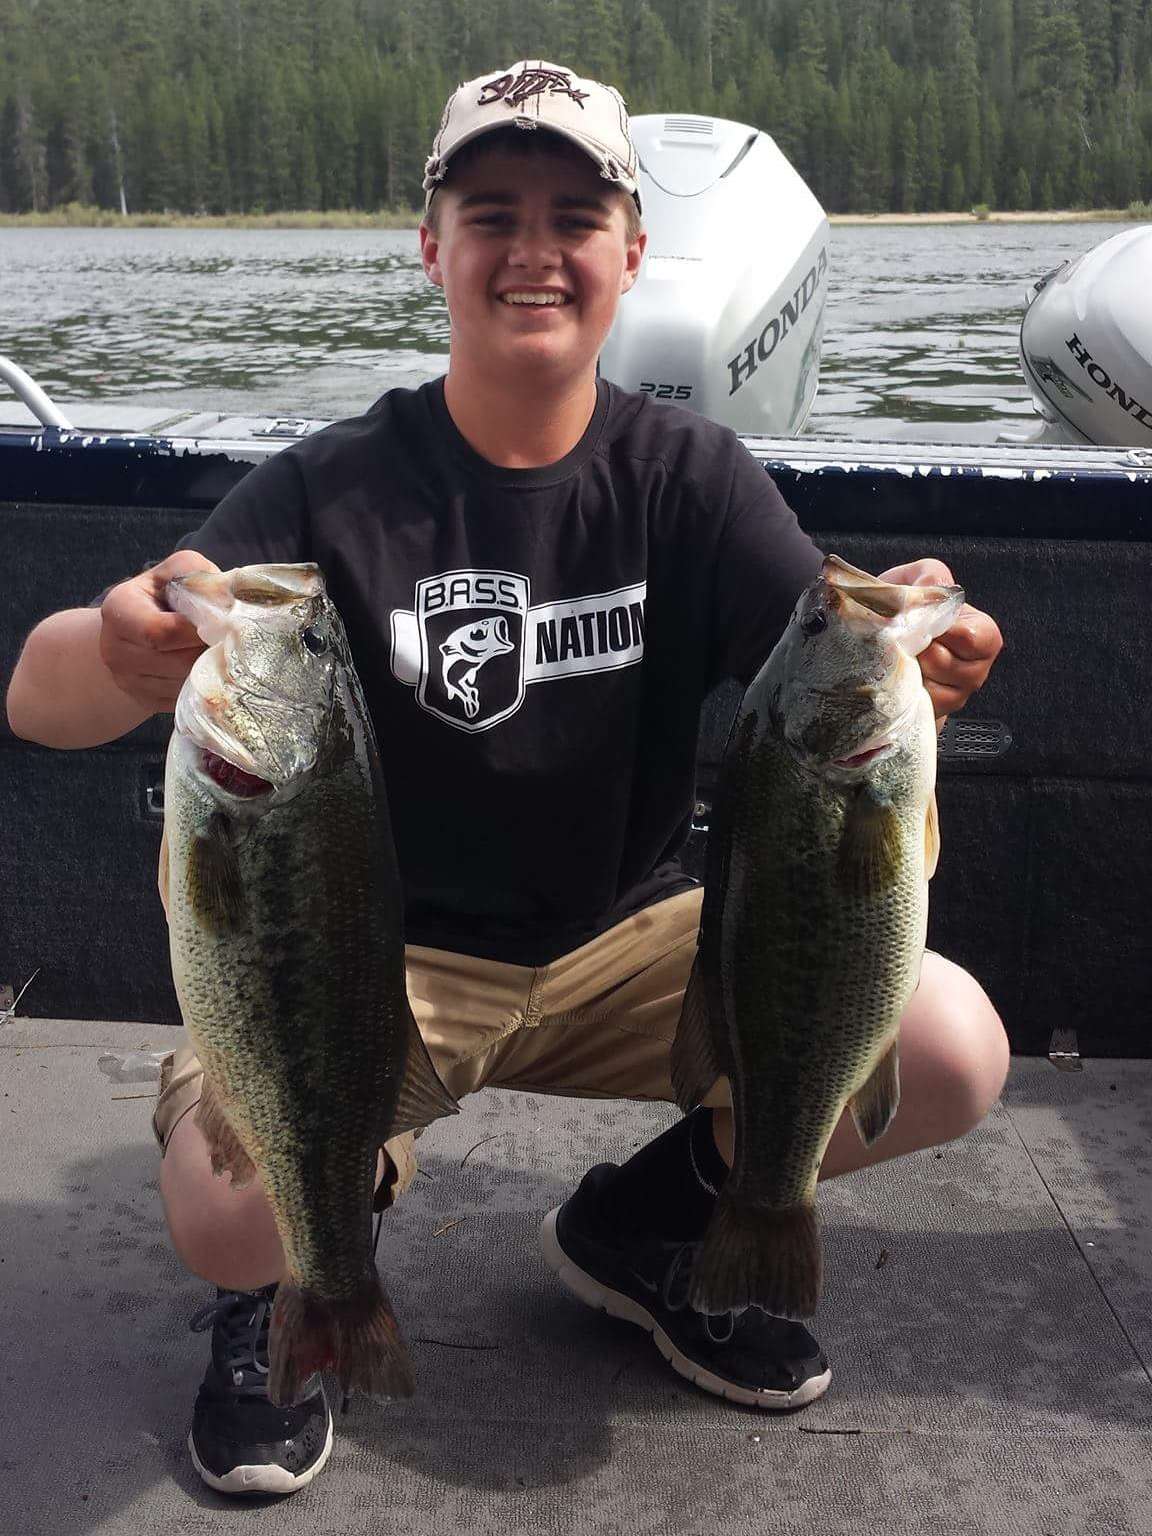 <b>Oregon: Logan Degree</b><br>
Degree of Redmond, Ore., is a member of the Ridgeview Bassmasters. He has two wins and six Top 5 finishes in the past year. Degree has also volunteered in the C.A.S.T. for Kids program for past 5 years.
